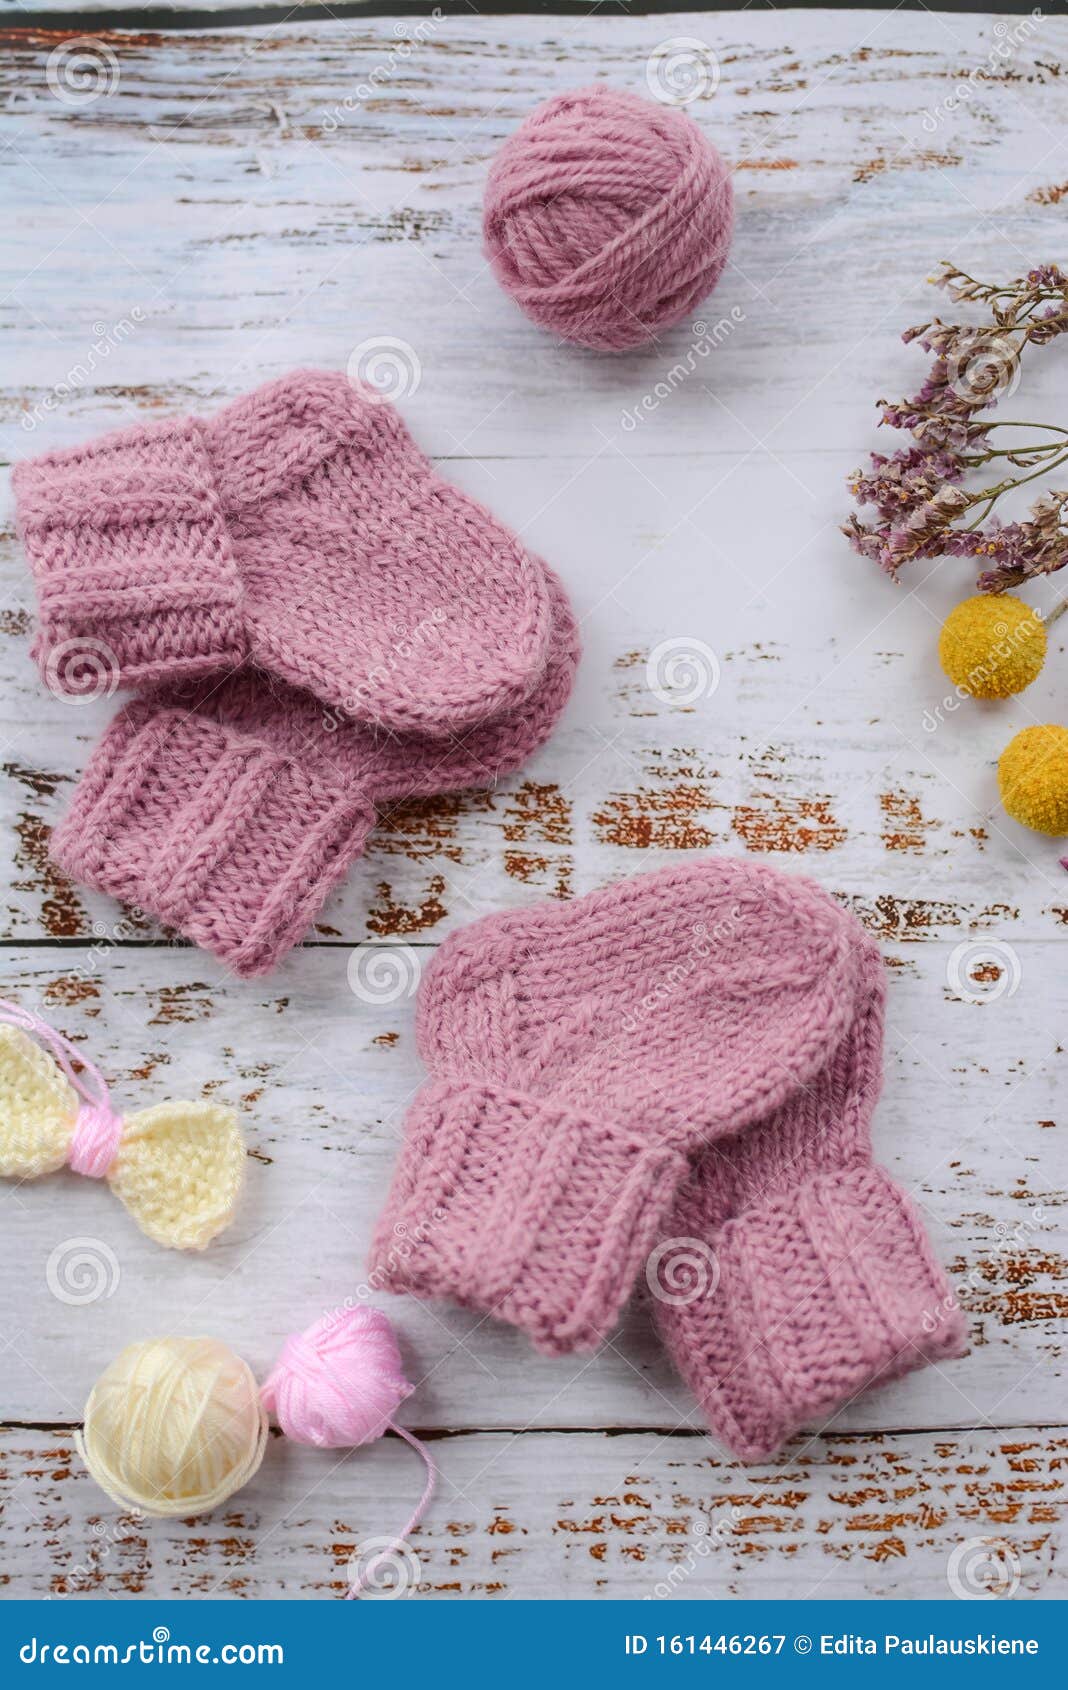 Warm and Soft Girl Socks, Winter Fashion, Made of Wool Stock Image ...